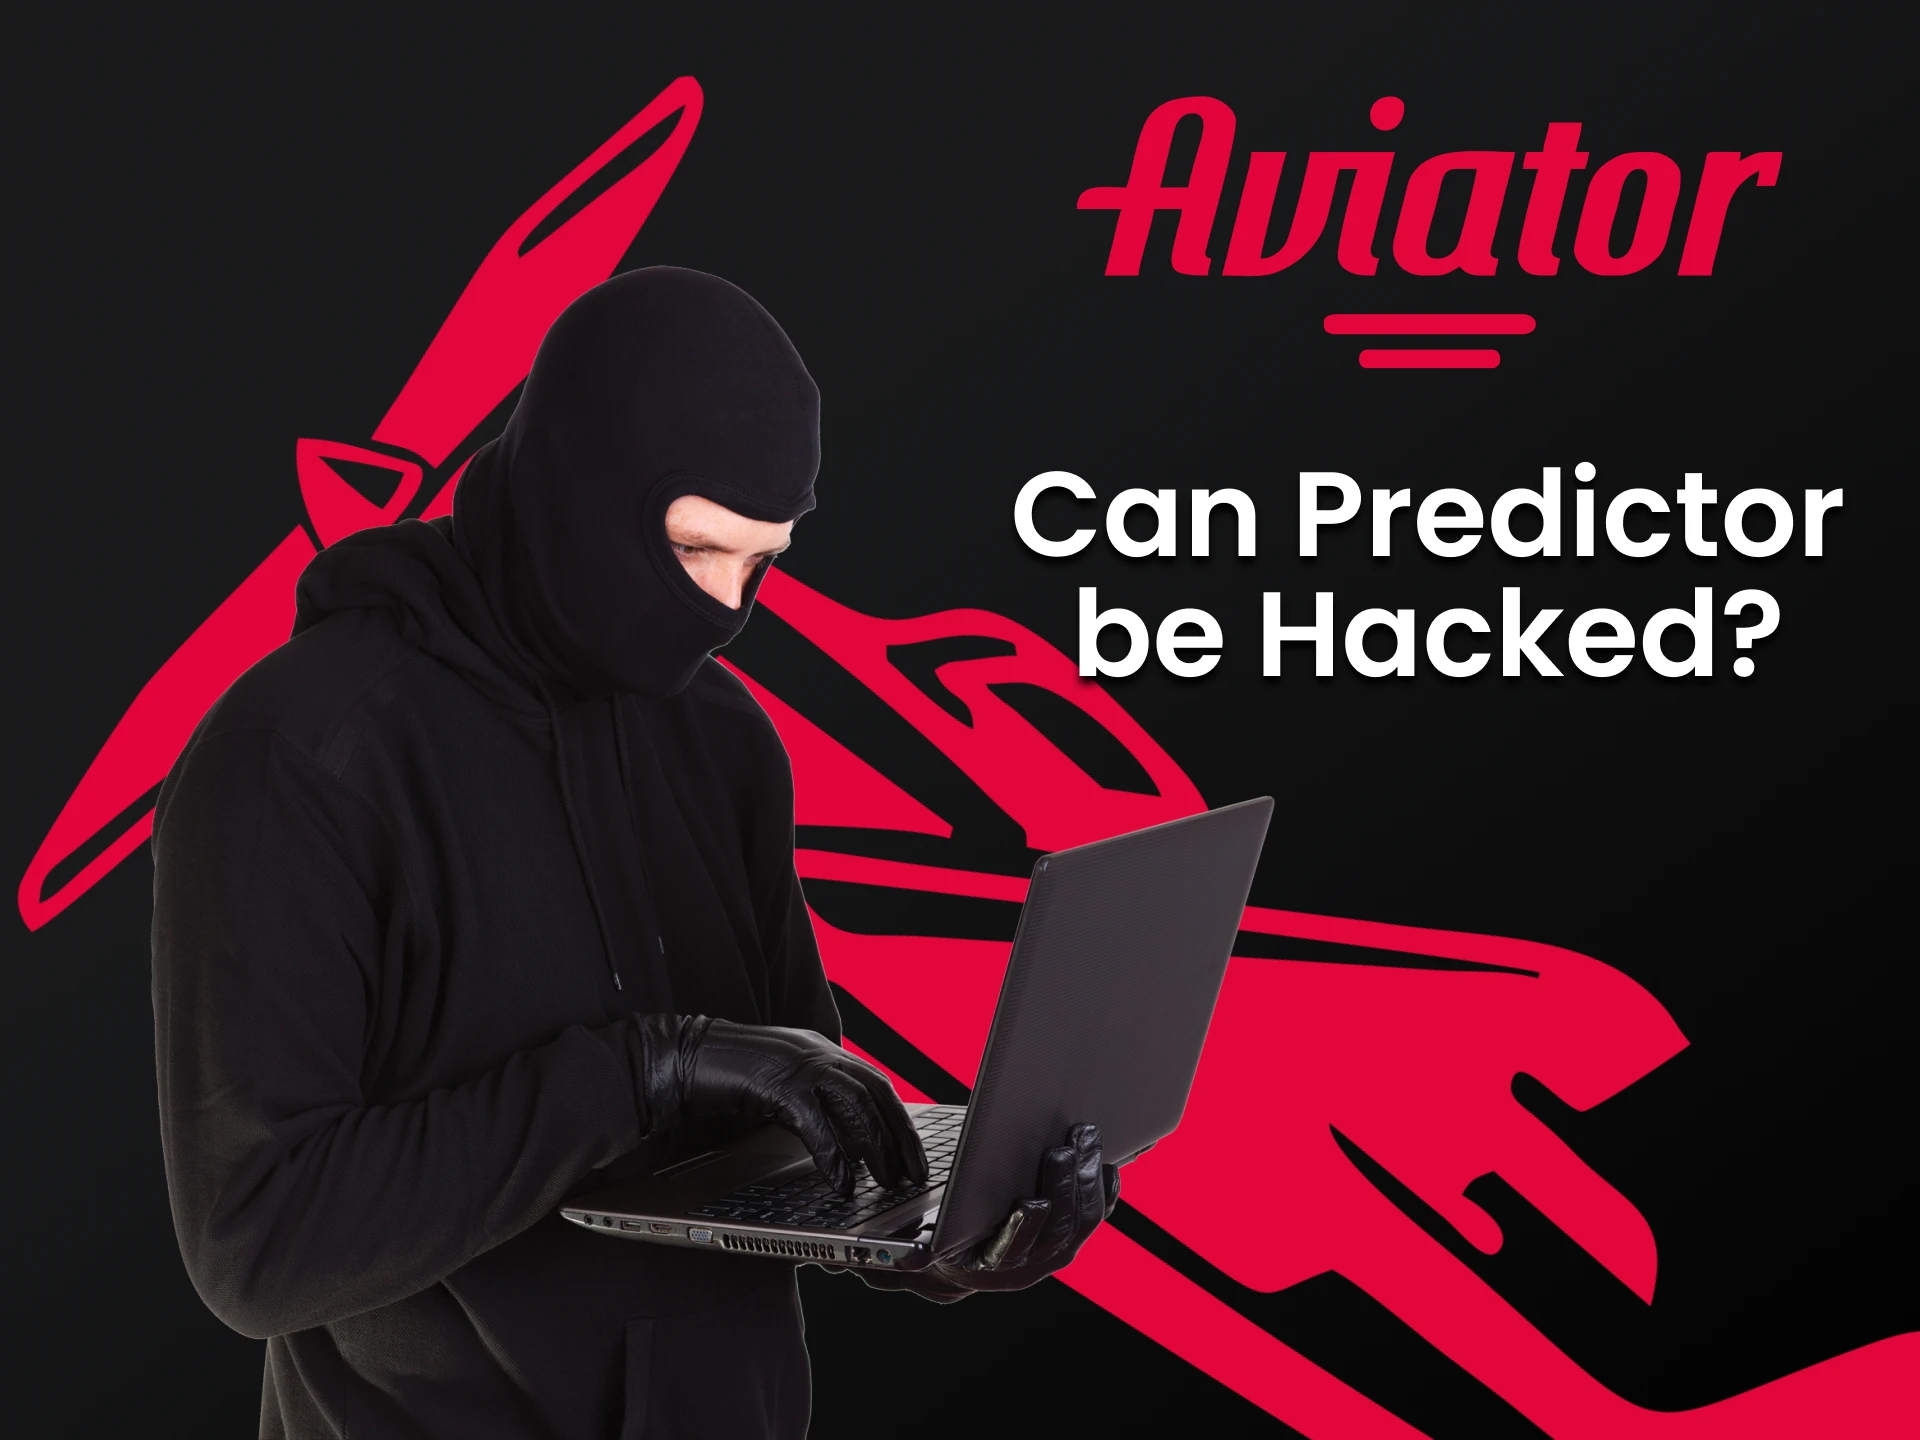 We will tell you whether it is possible to hack Predictor for the game Aviator.